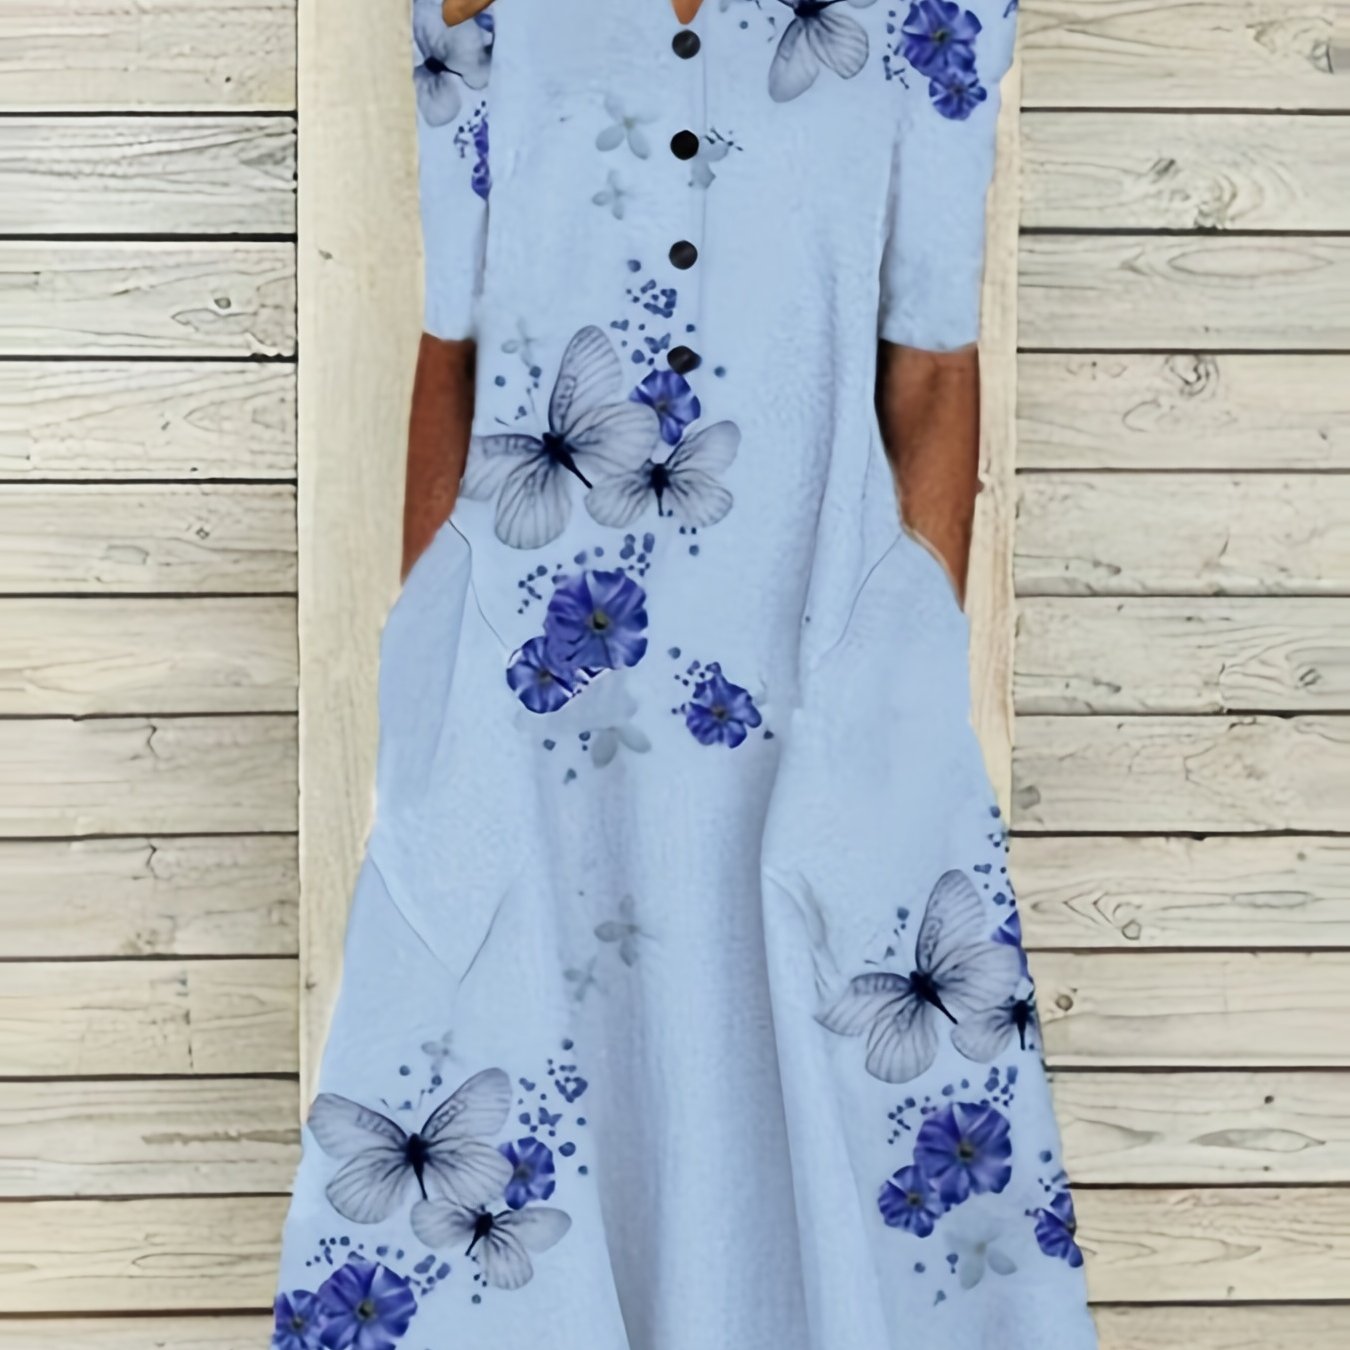 「lovevop」Floral & Butterfly Print V Neck Dress, Casual Button Front Short Sleeve Dress For Spring & Summer, Women's Clothing